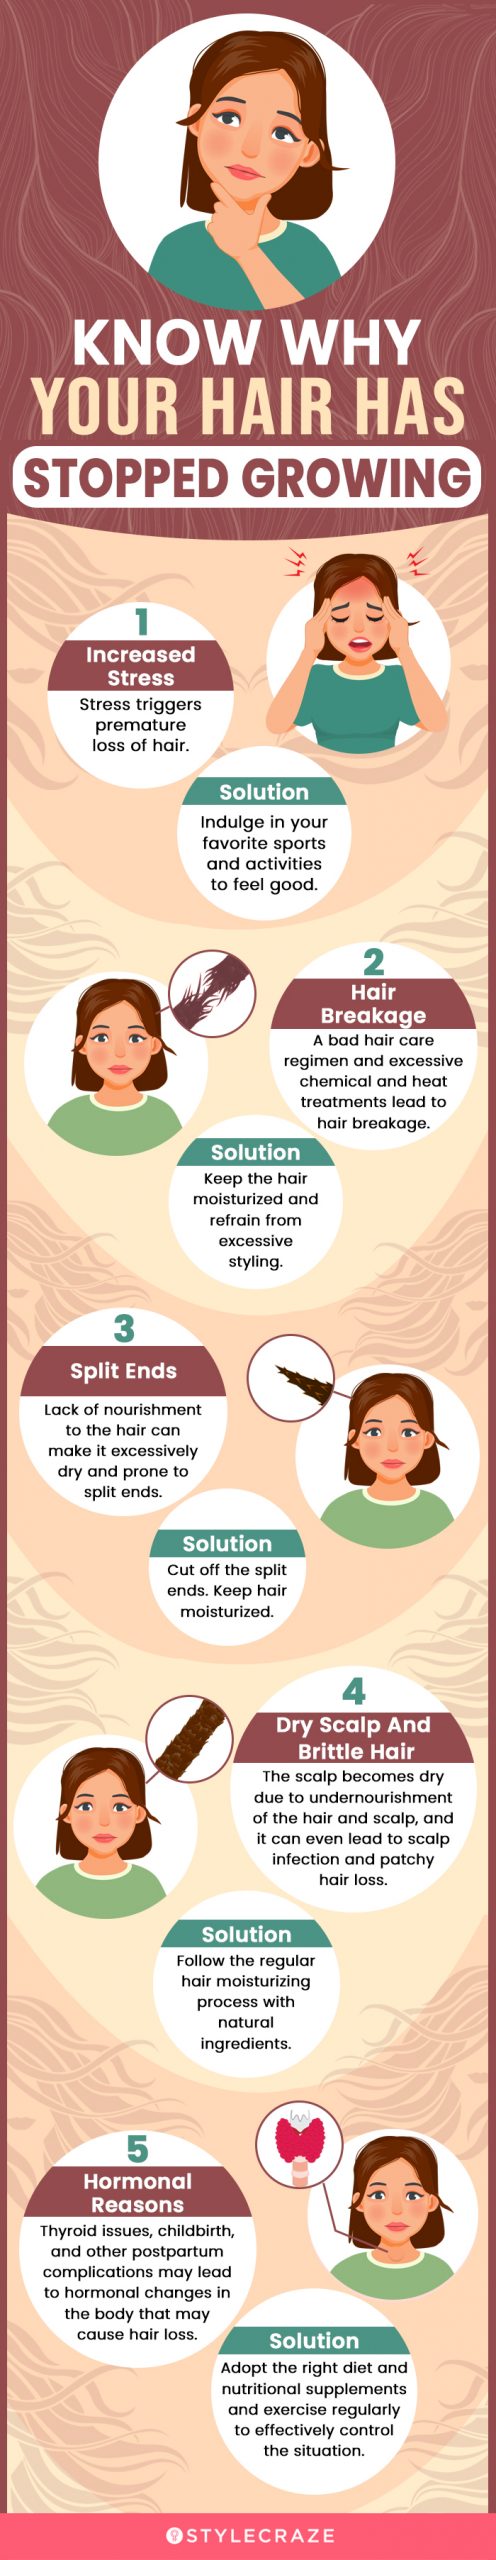 know why your hair has stopped growing [infographic]